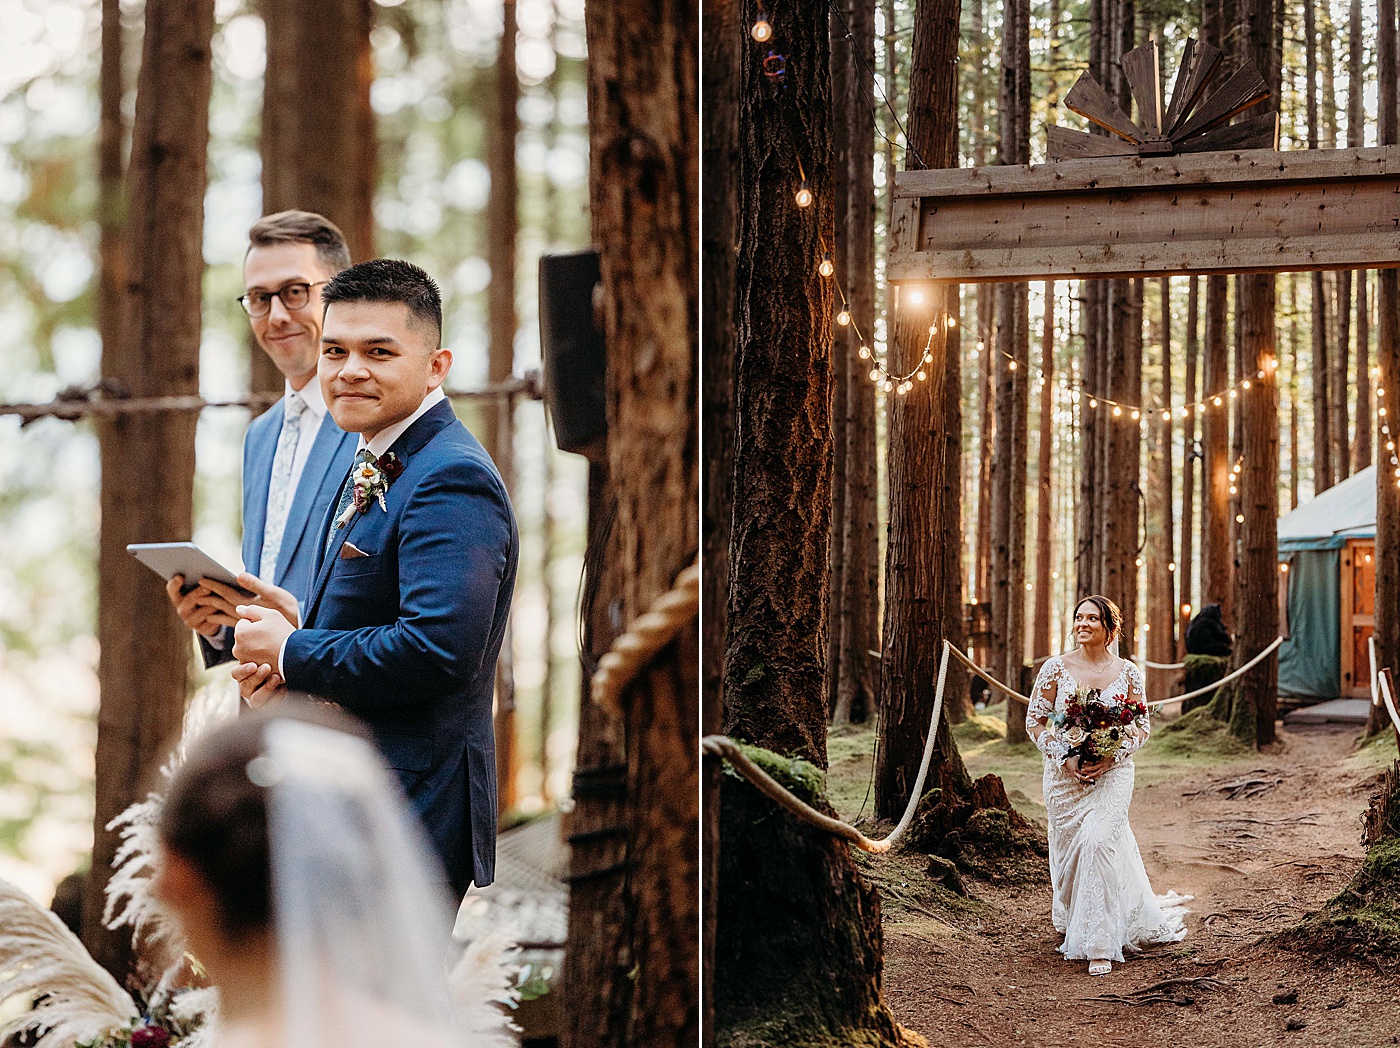 Intimate wedding at Emerald Forest Treehouse | Photo by Megan Montalvo Photography